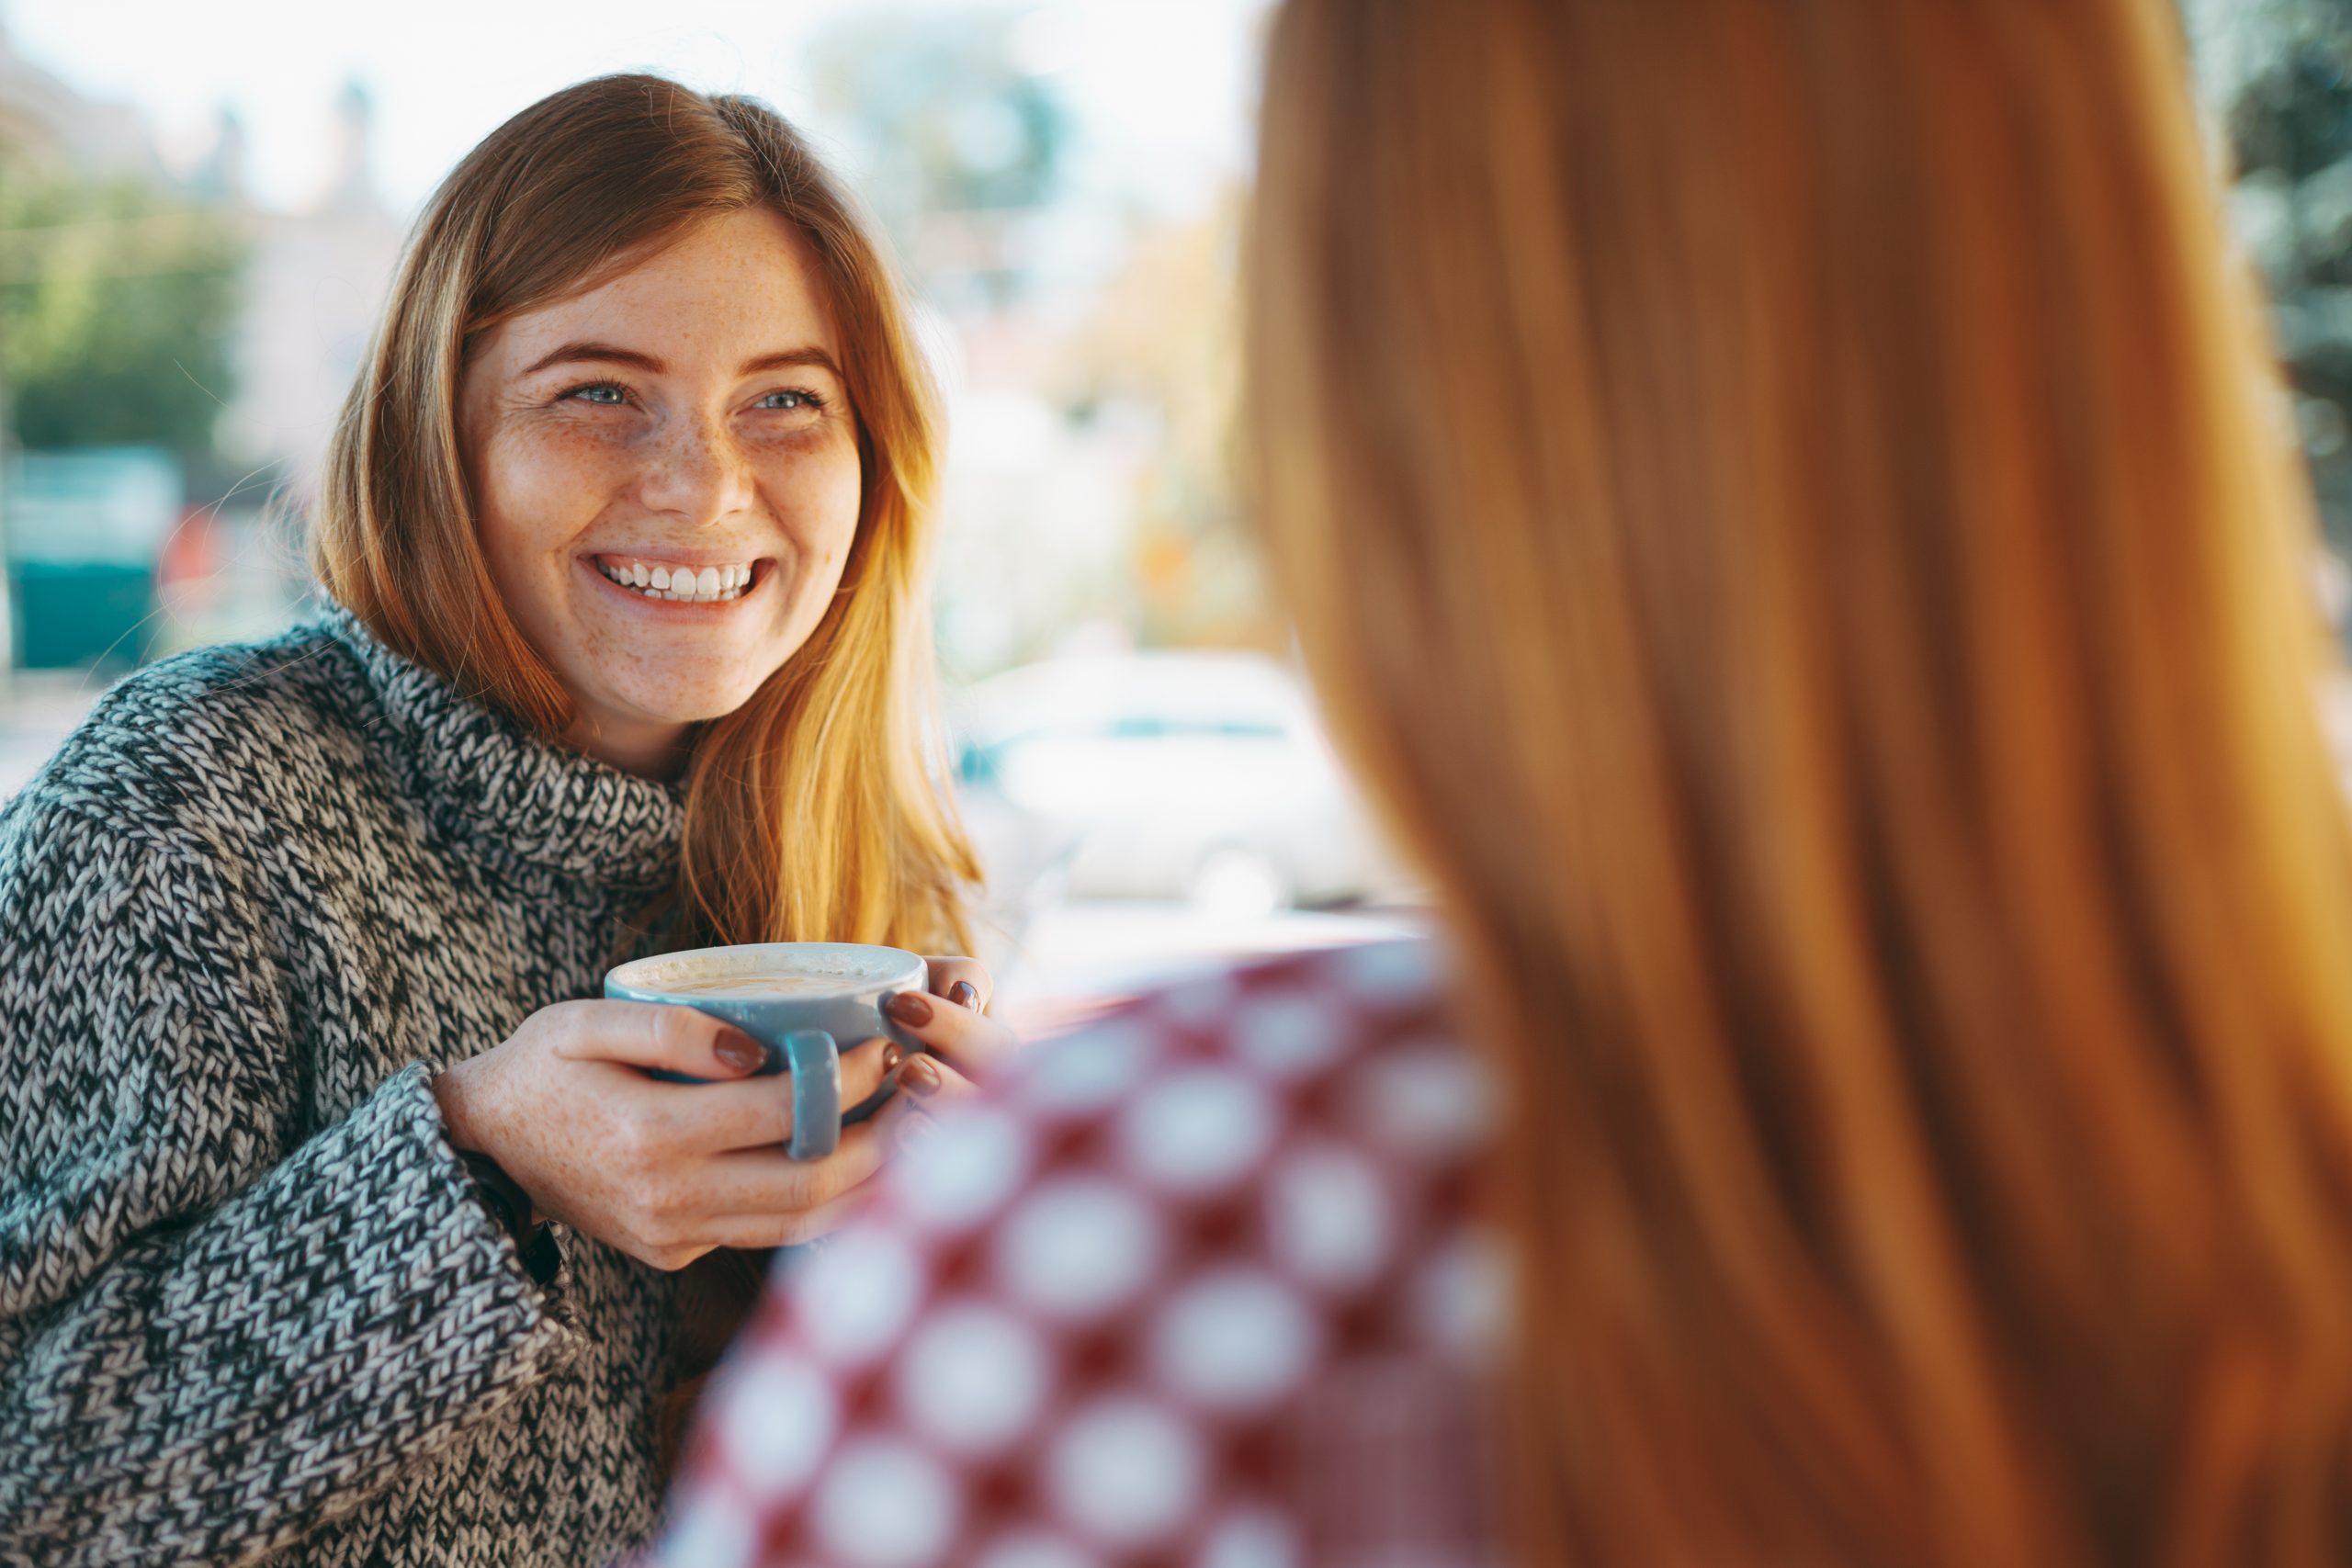 a smiling young woman drinking coffee and speaking to another young woman whos face we cannot see